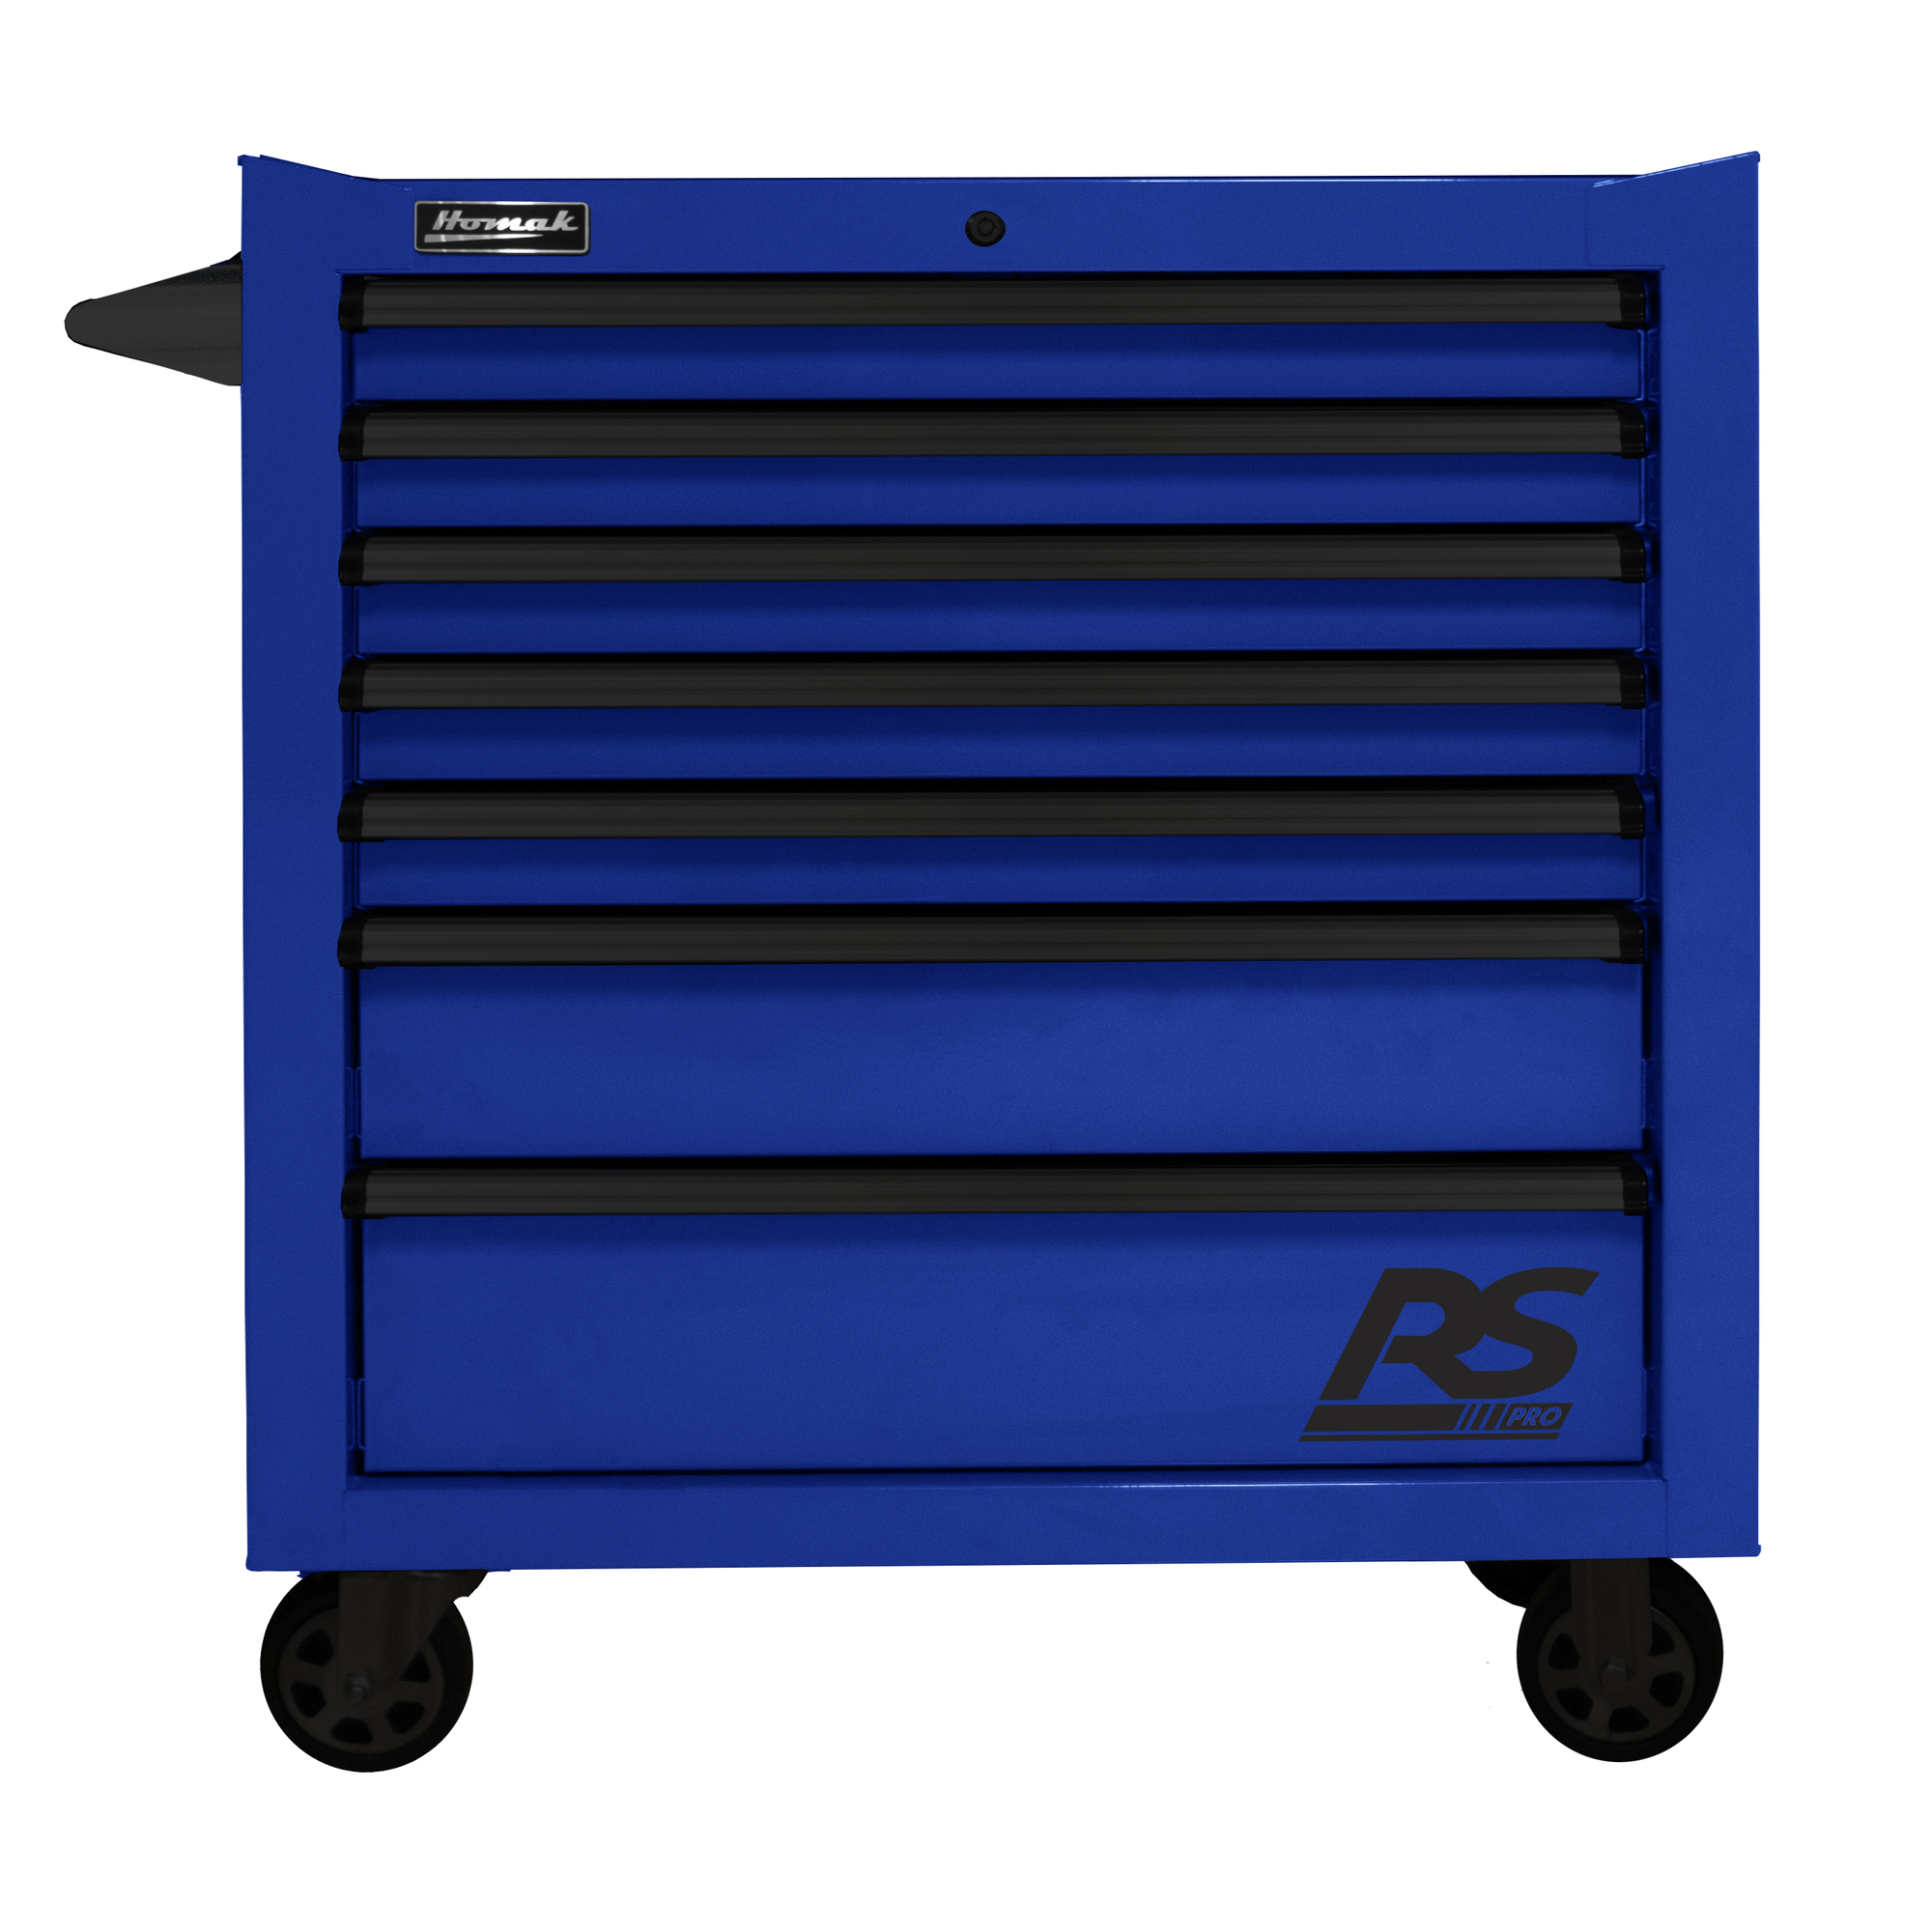 Homak RS Pro, 36Inch RS PRO 7 DWR ROLLING CABINET-BLUE, Width 39 in, Height 36 in, Color Blue, Model BL04036070